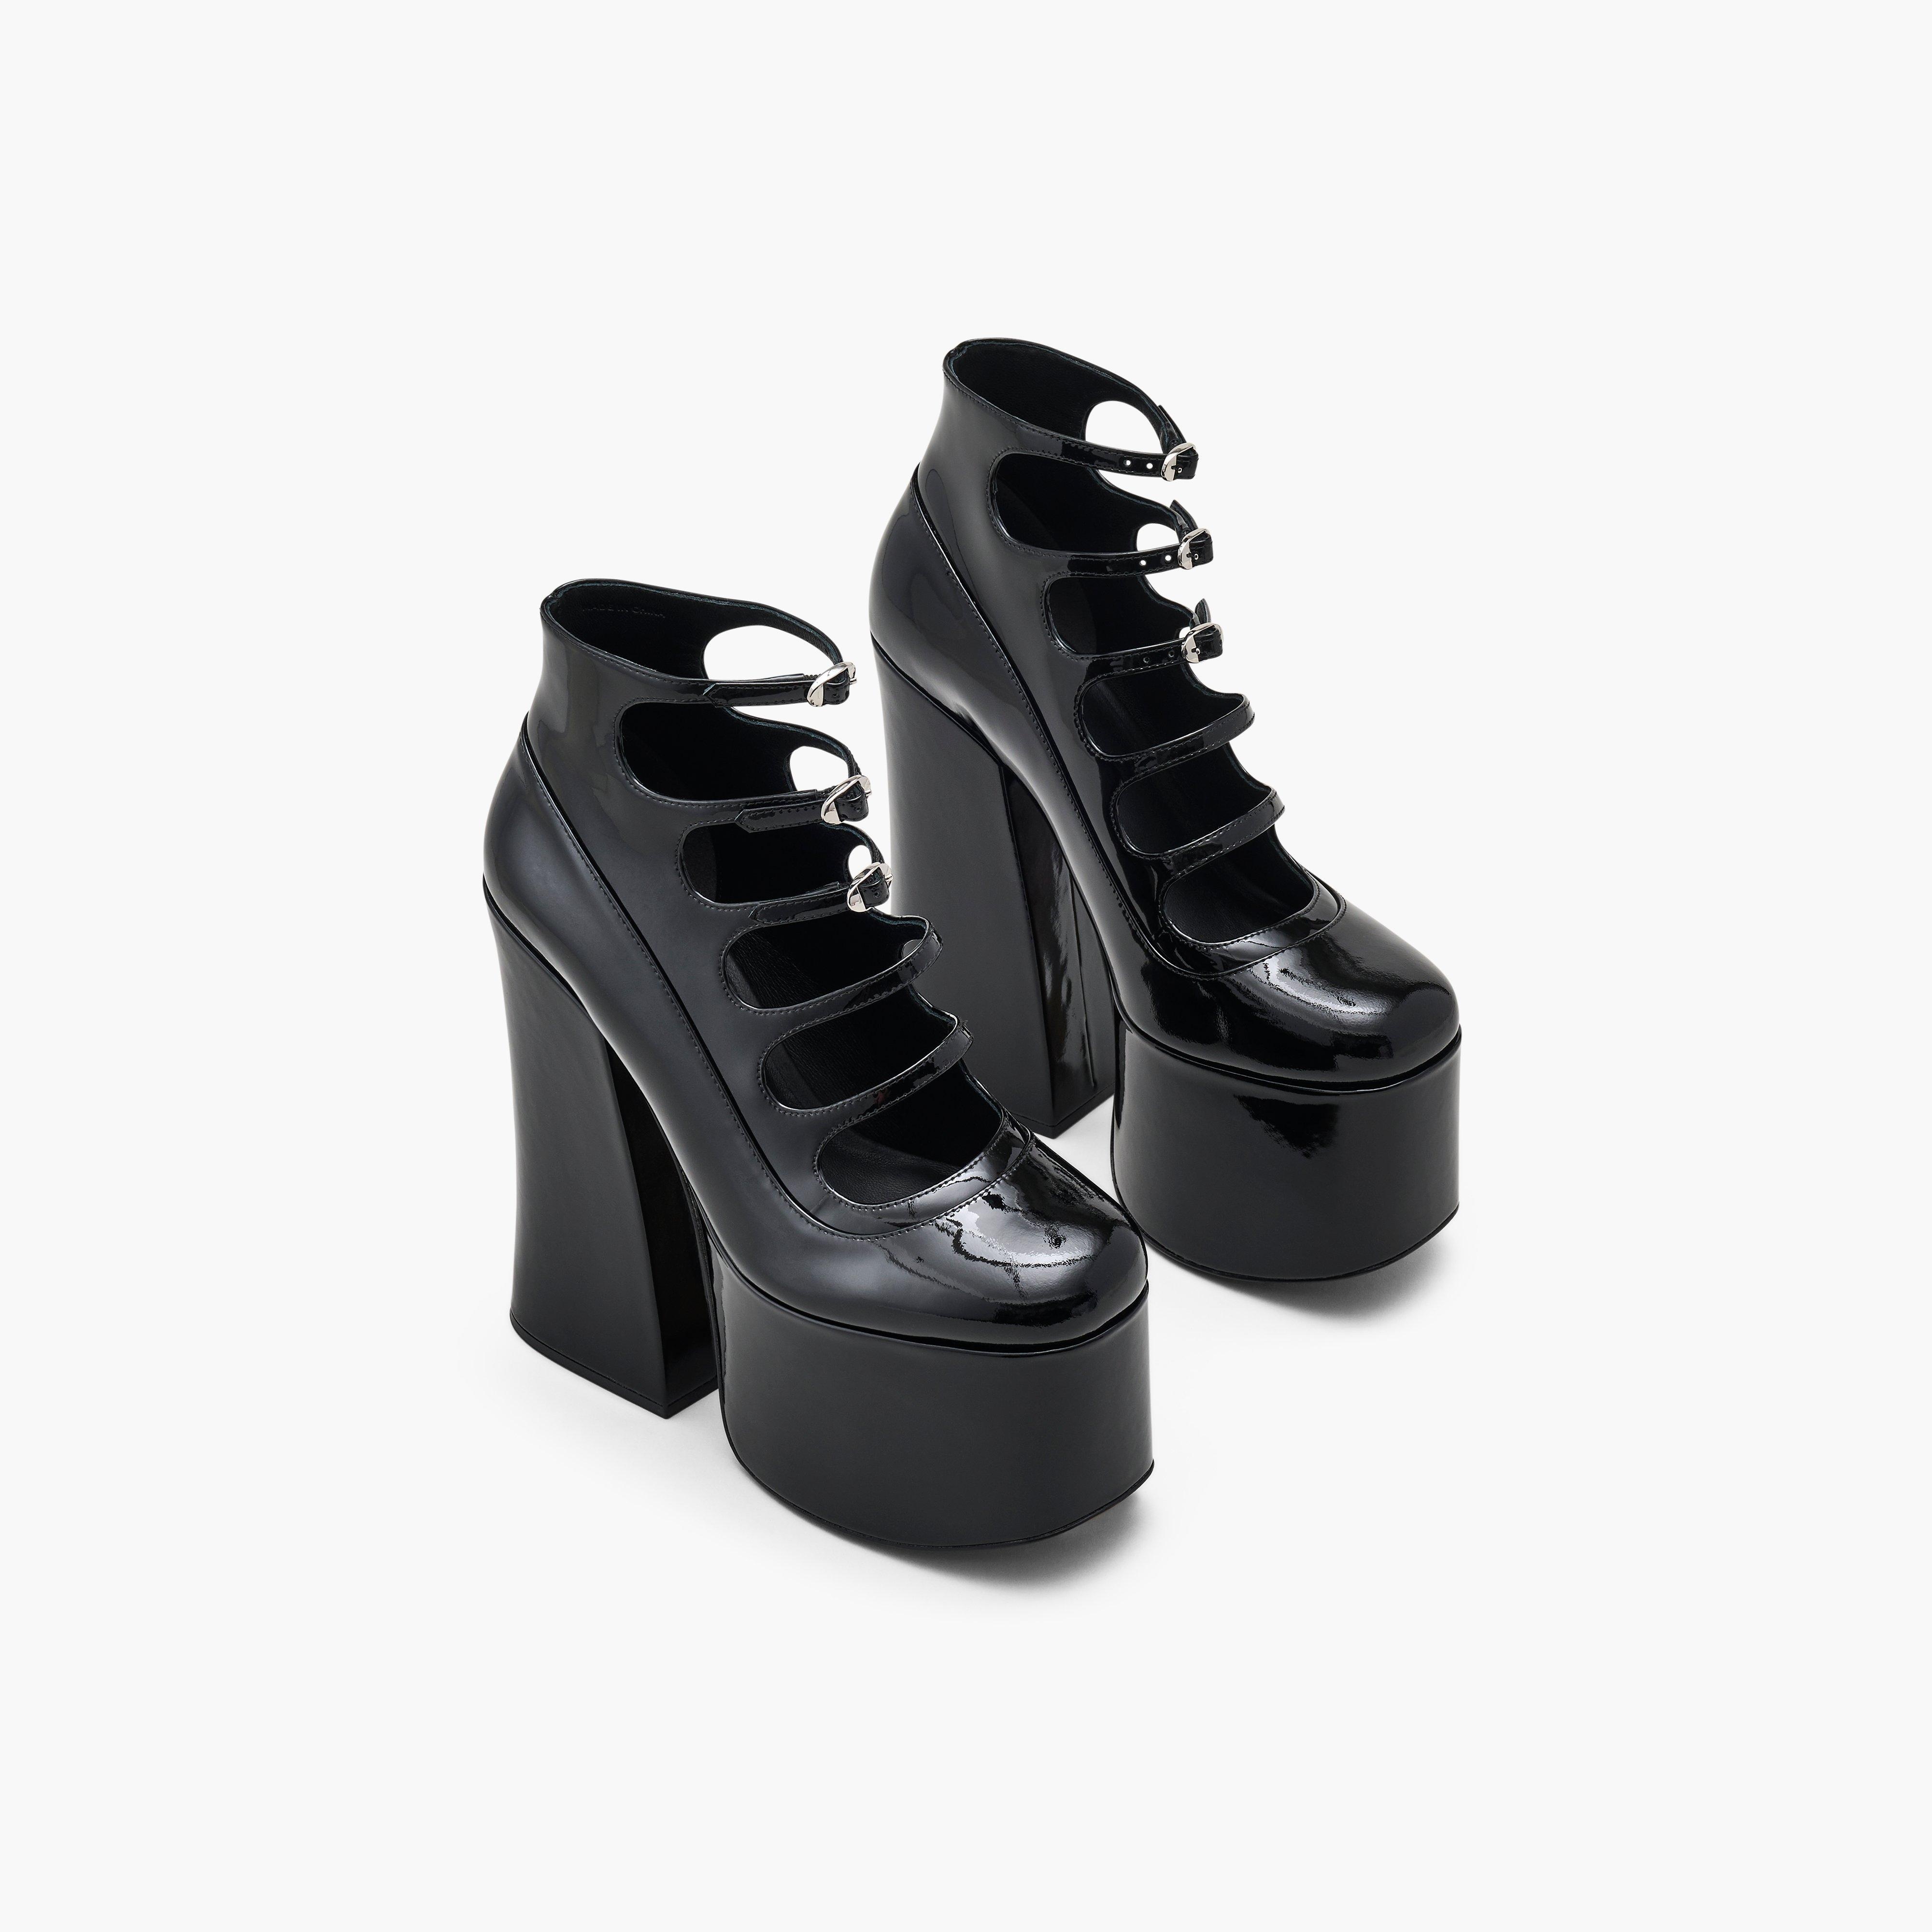 THE PATENT LEATHER KIKI ANKLE BOOT - 4